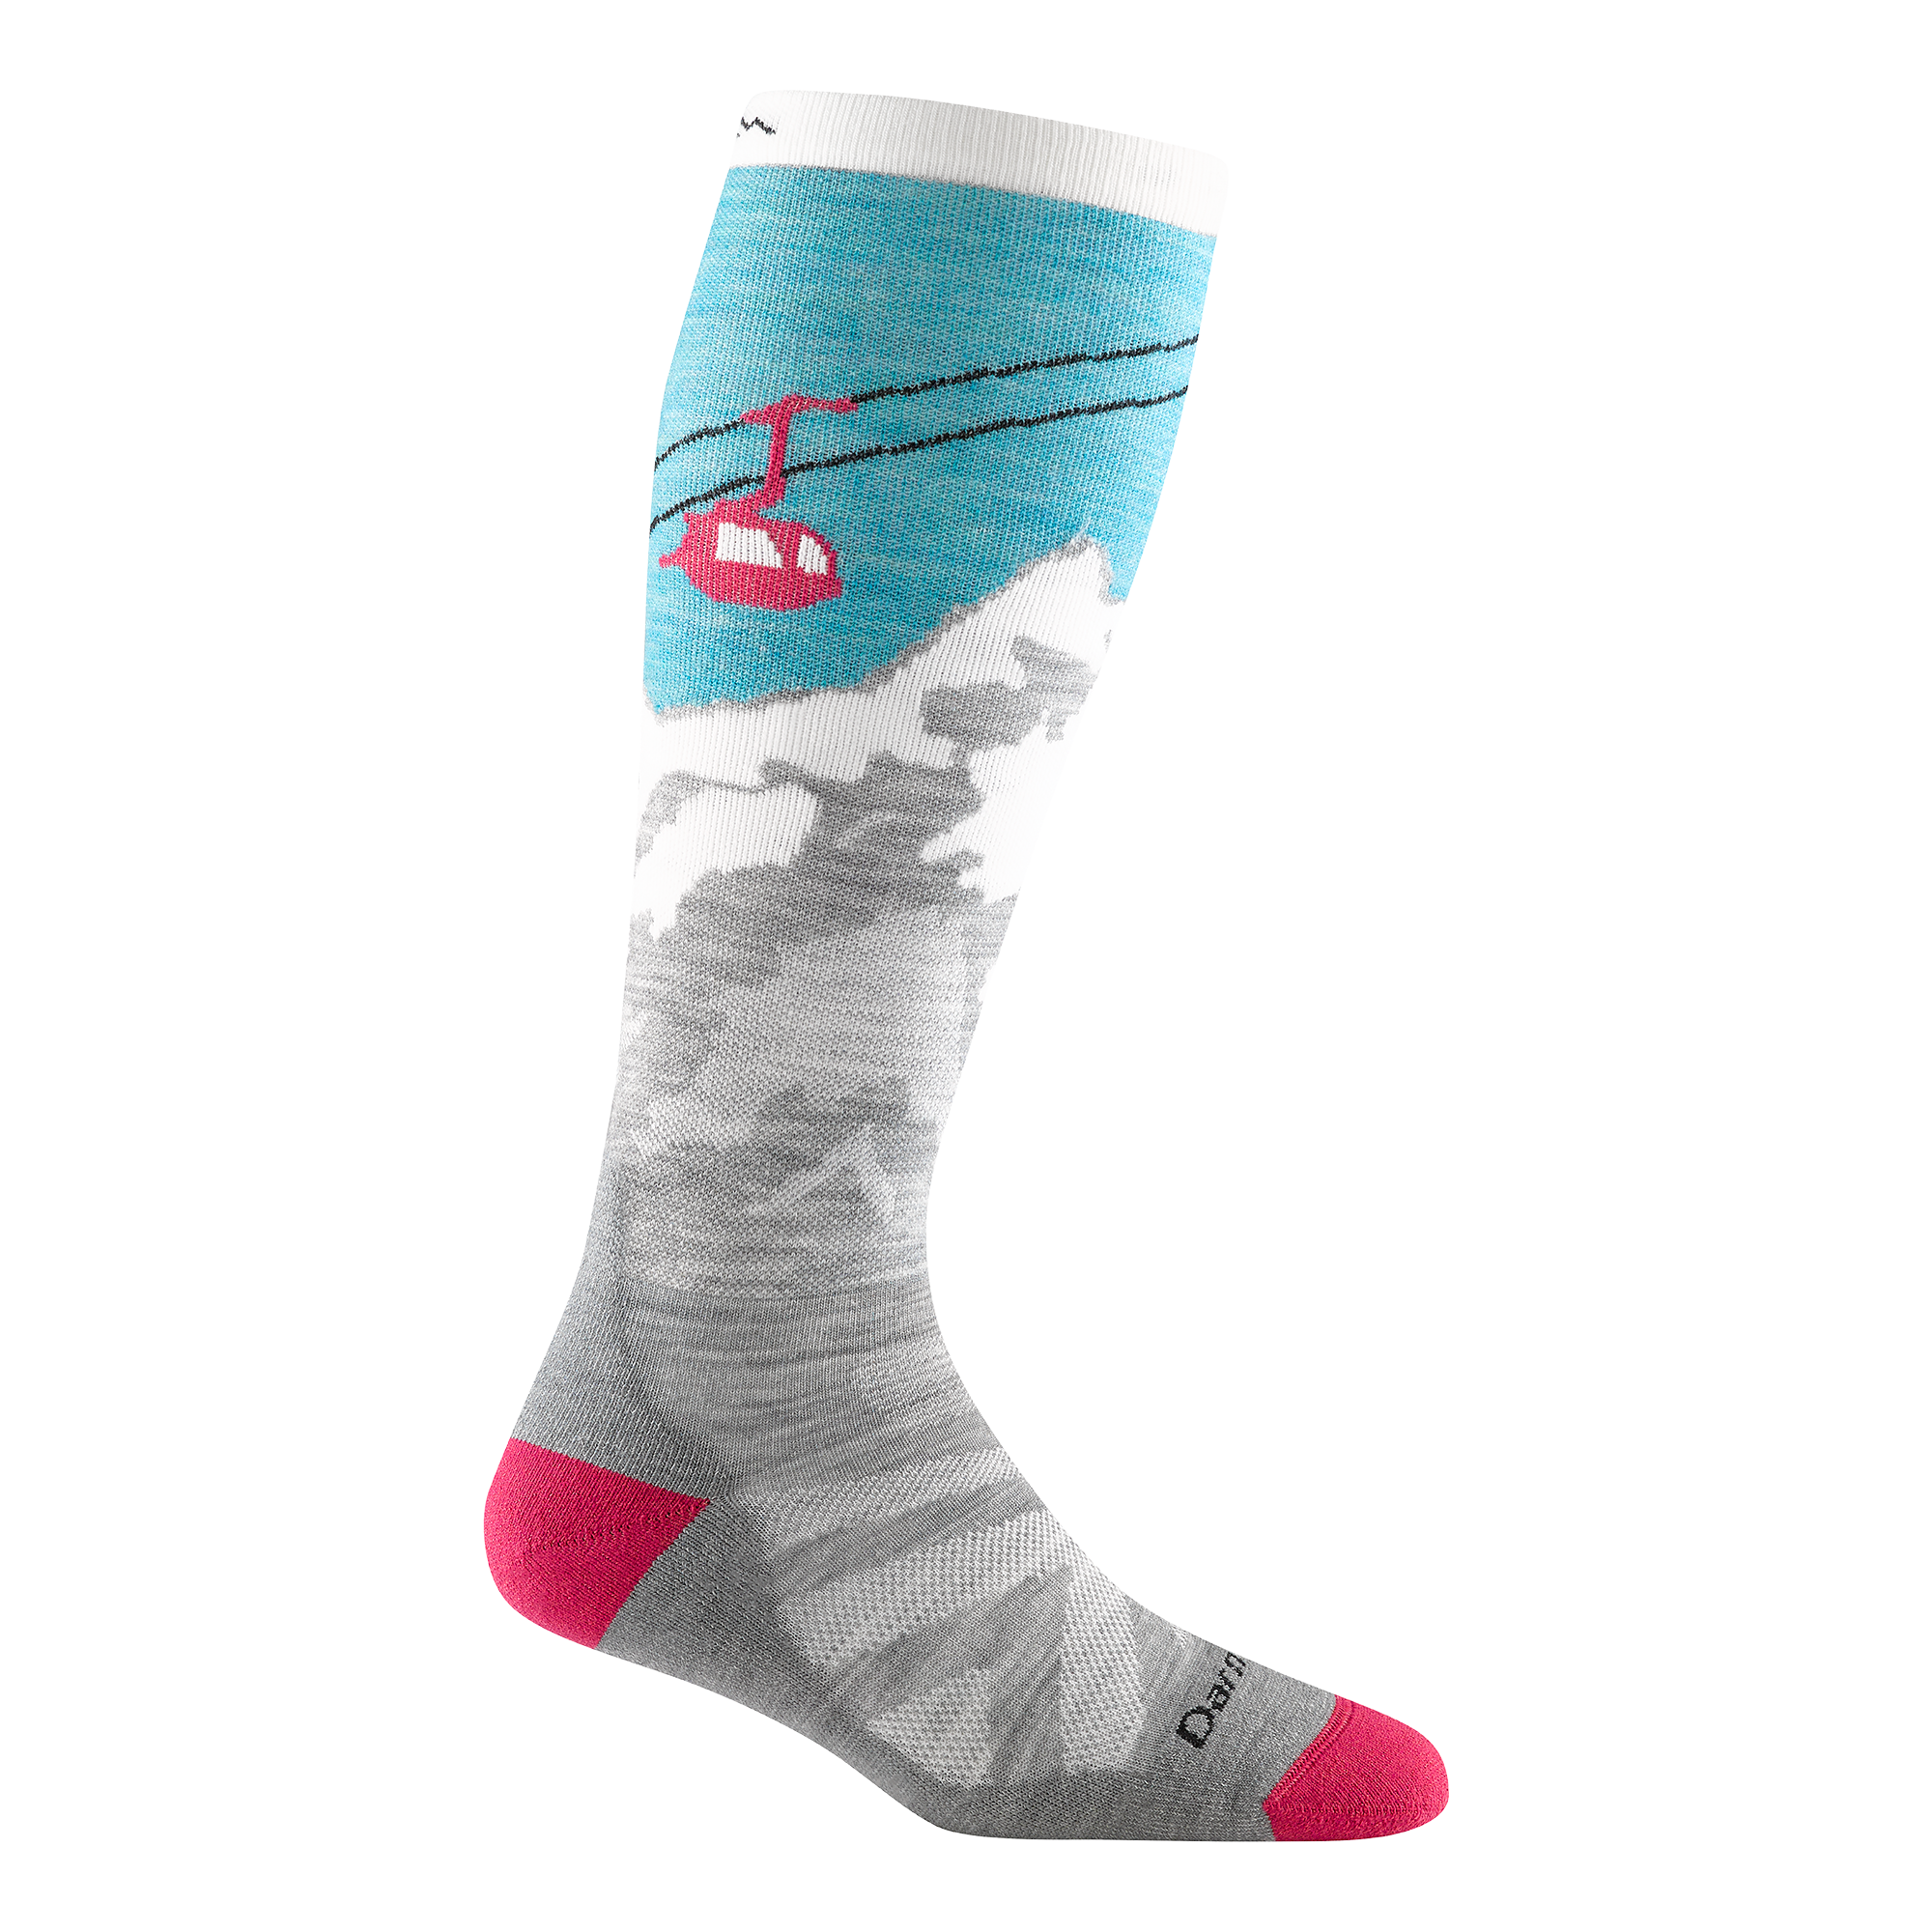 1827 women's yeti over-the-calf ski sock in aqua with pink toe/heel accents and gray mountain and pink gondola design